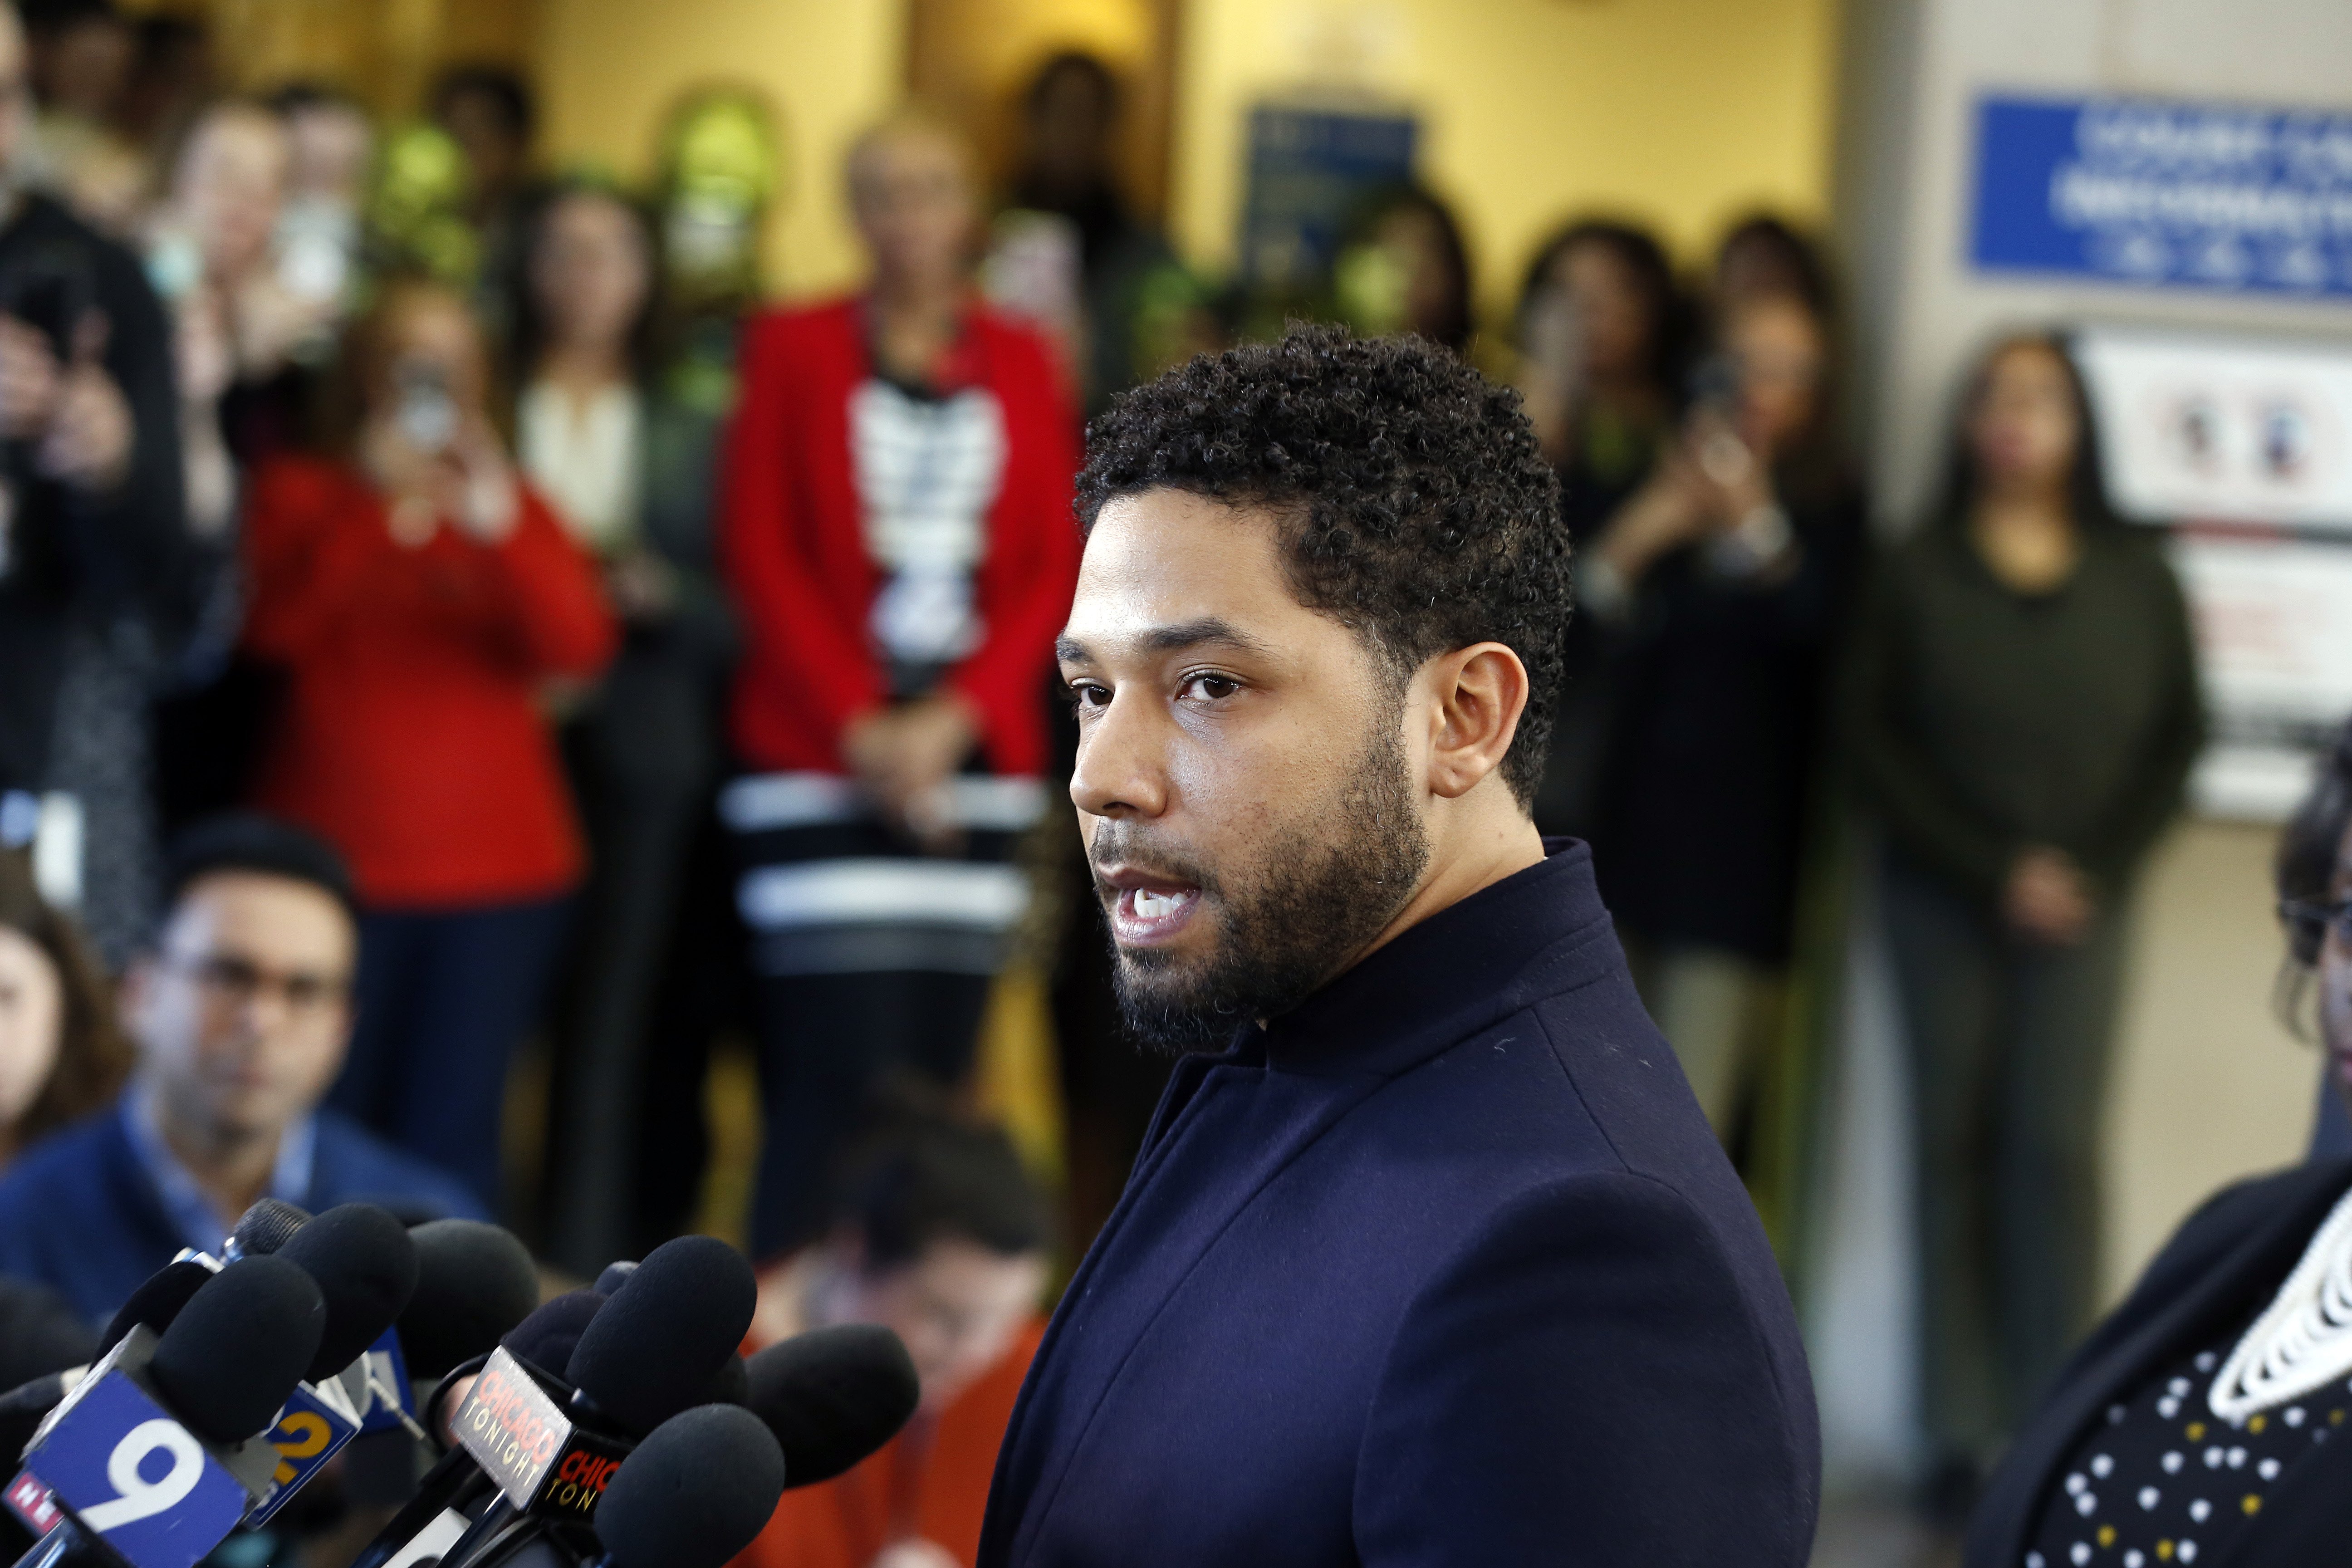 Jussie Smollett leaves after his court appearance at Leighton Courthouse on March 26, 2019 in Chicago, Illinois | Photo: Getty Images